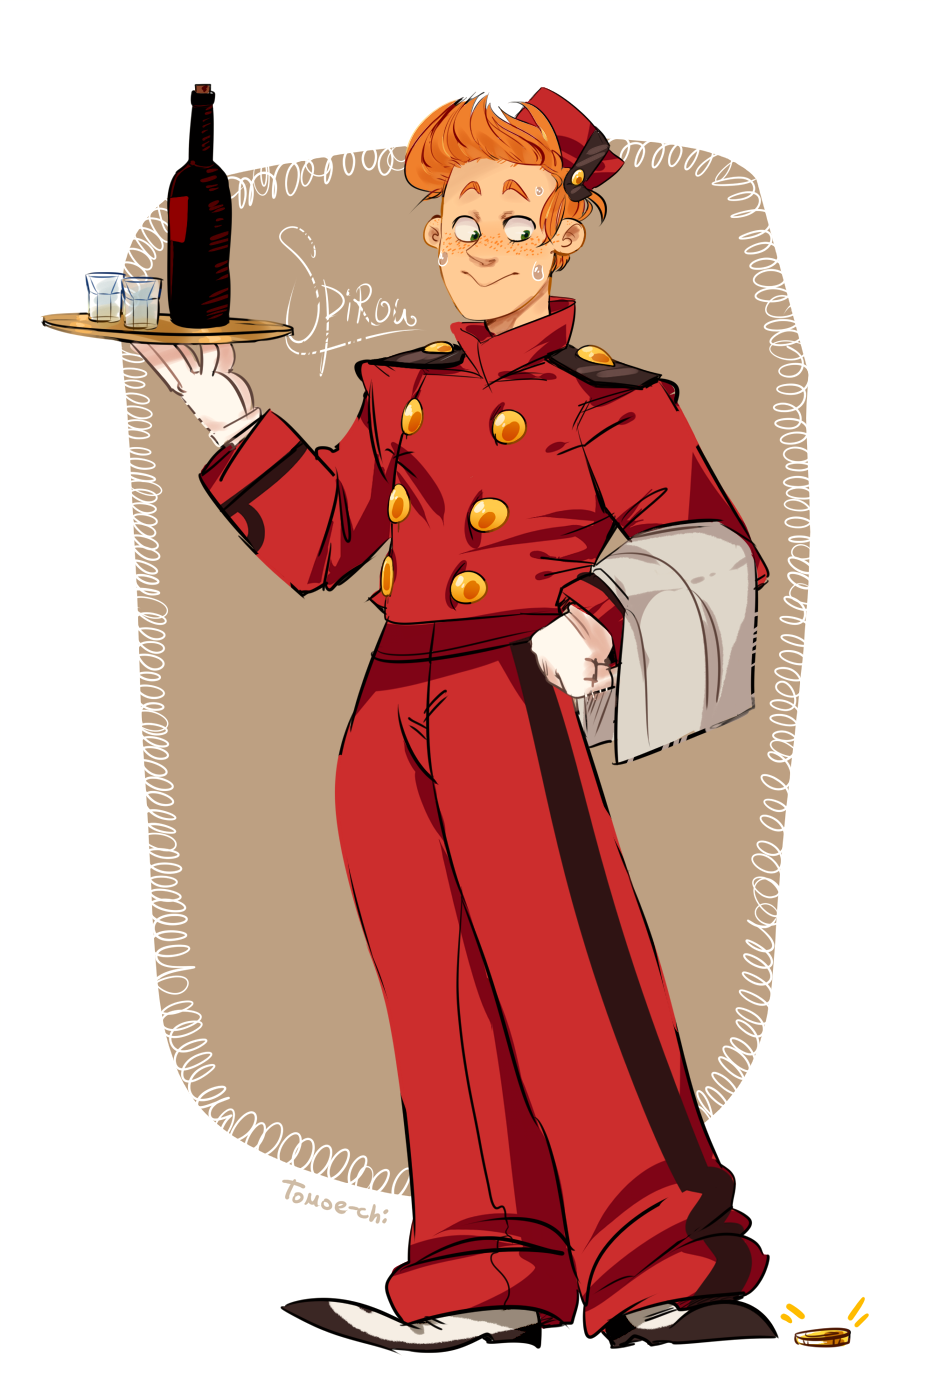 Spirou fanart ('gift thing for Fink'; ill. tomatomagica; (c) Dupuis and the artist; image from tumblr)